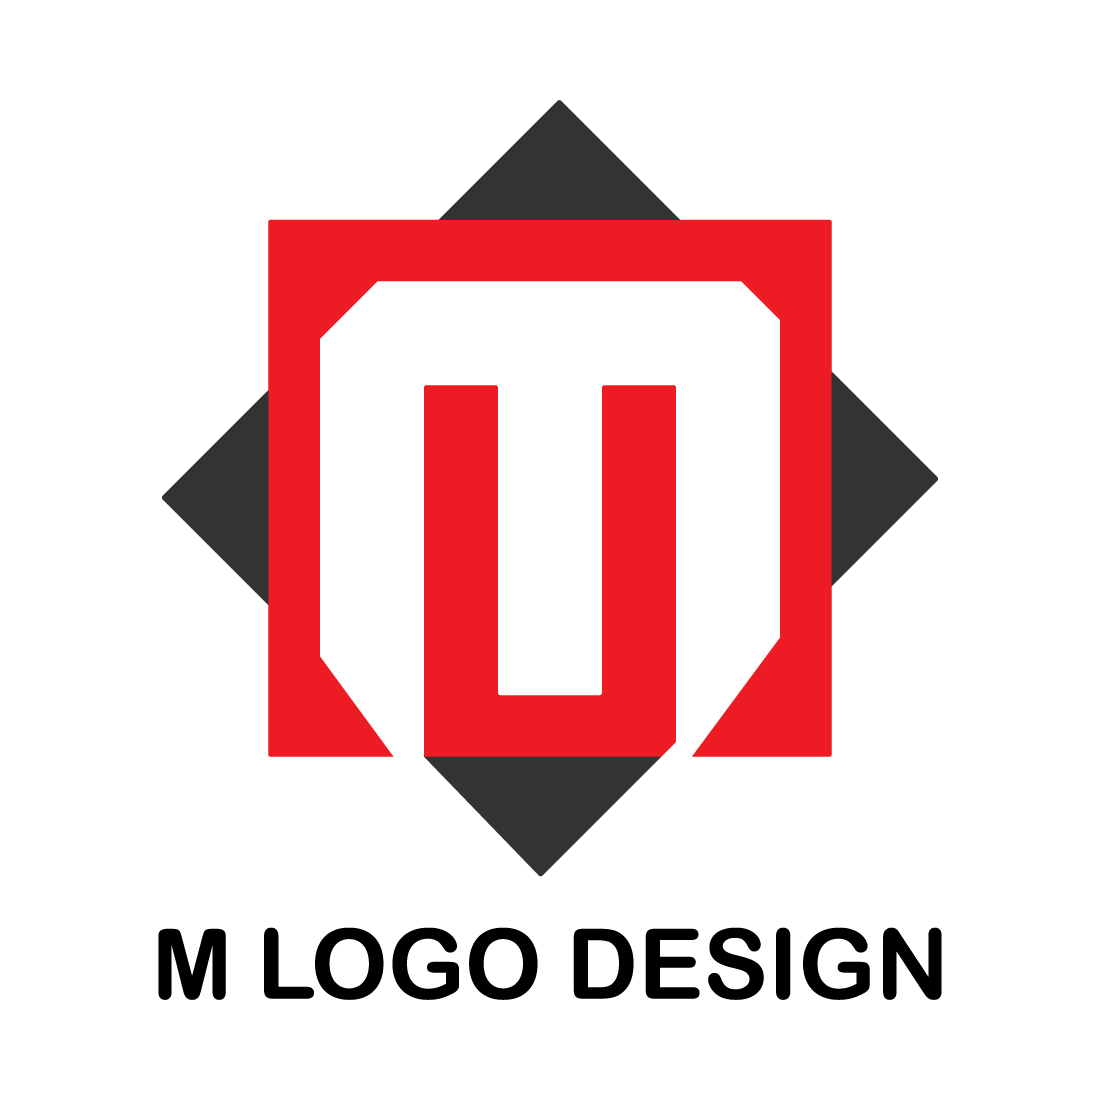 Initials M letters logo design vector template images M logo red and black color icon preview image.